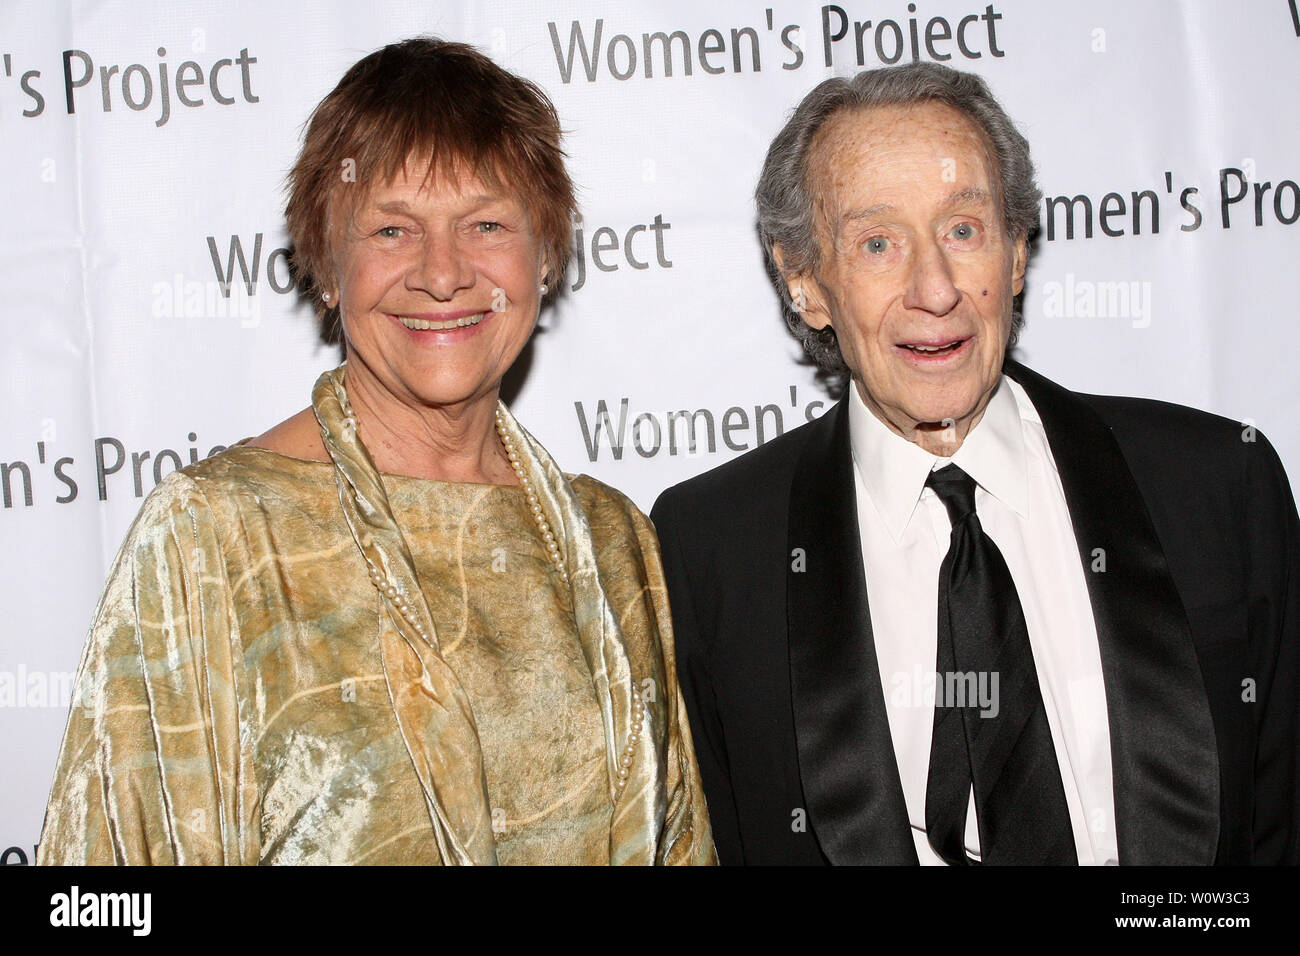 New York, USA. 2 March, 2009. Estelle Parsons, Arthur Penn at the 24th annual Women's Project gala at The Pierre Hotel. Credit: Steve Mack/Alamy Stock Photo